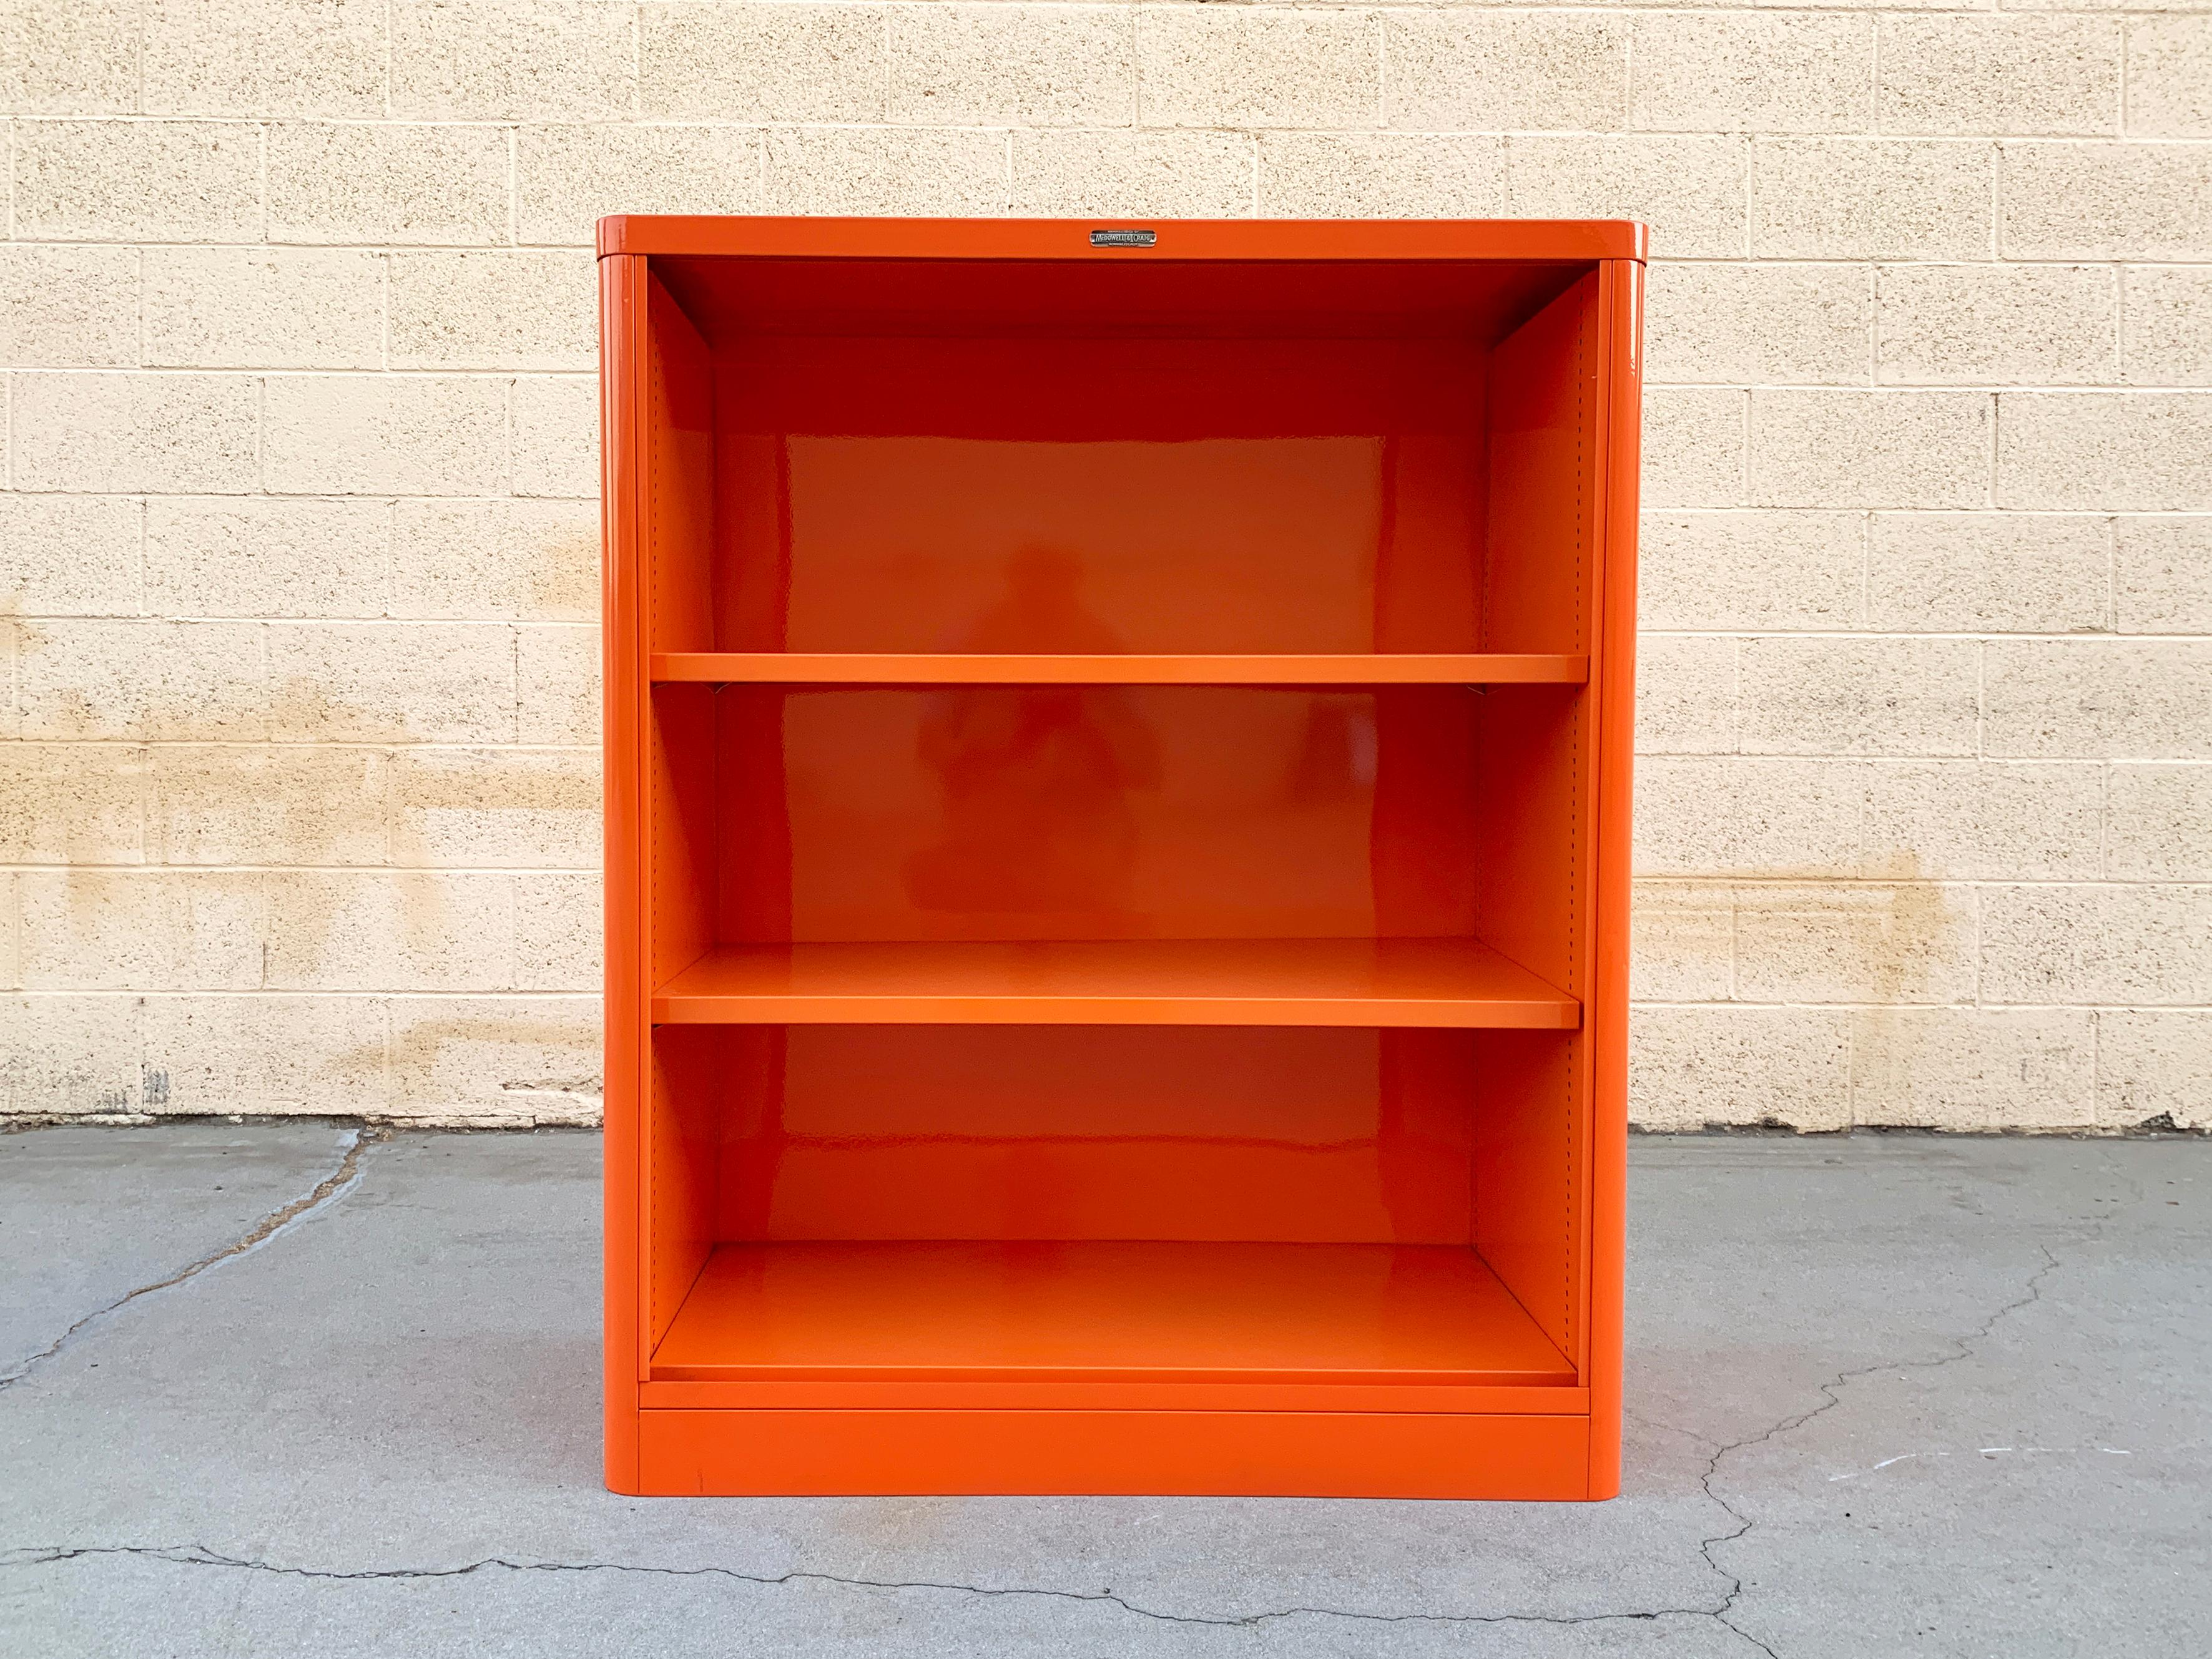 Uncommon McDowell Craig steel tanker bookcase refinished in a powder-coated pop of Tangerine (OG 05). Deeper than most tanker bookcases from this era, it features rounded corners, adjustable shelves and original McDowell Craig label. It's sleek and